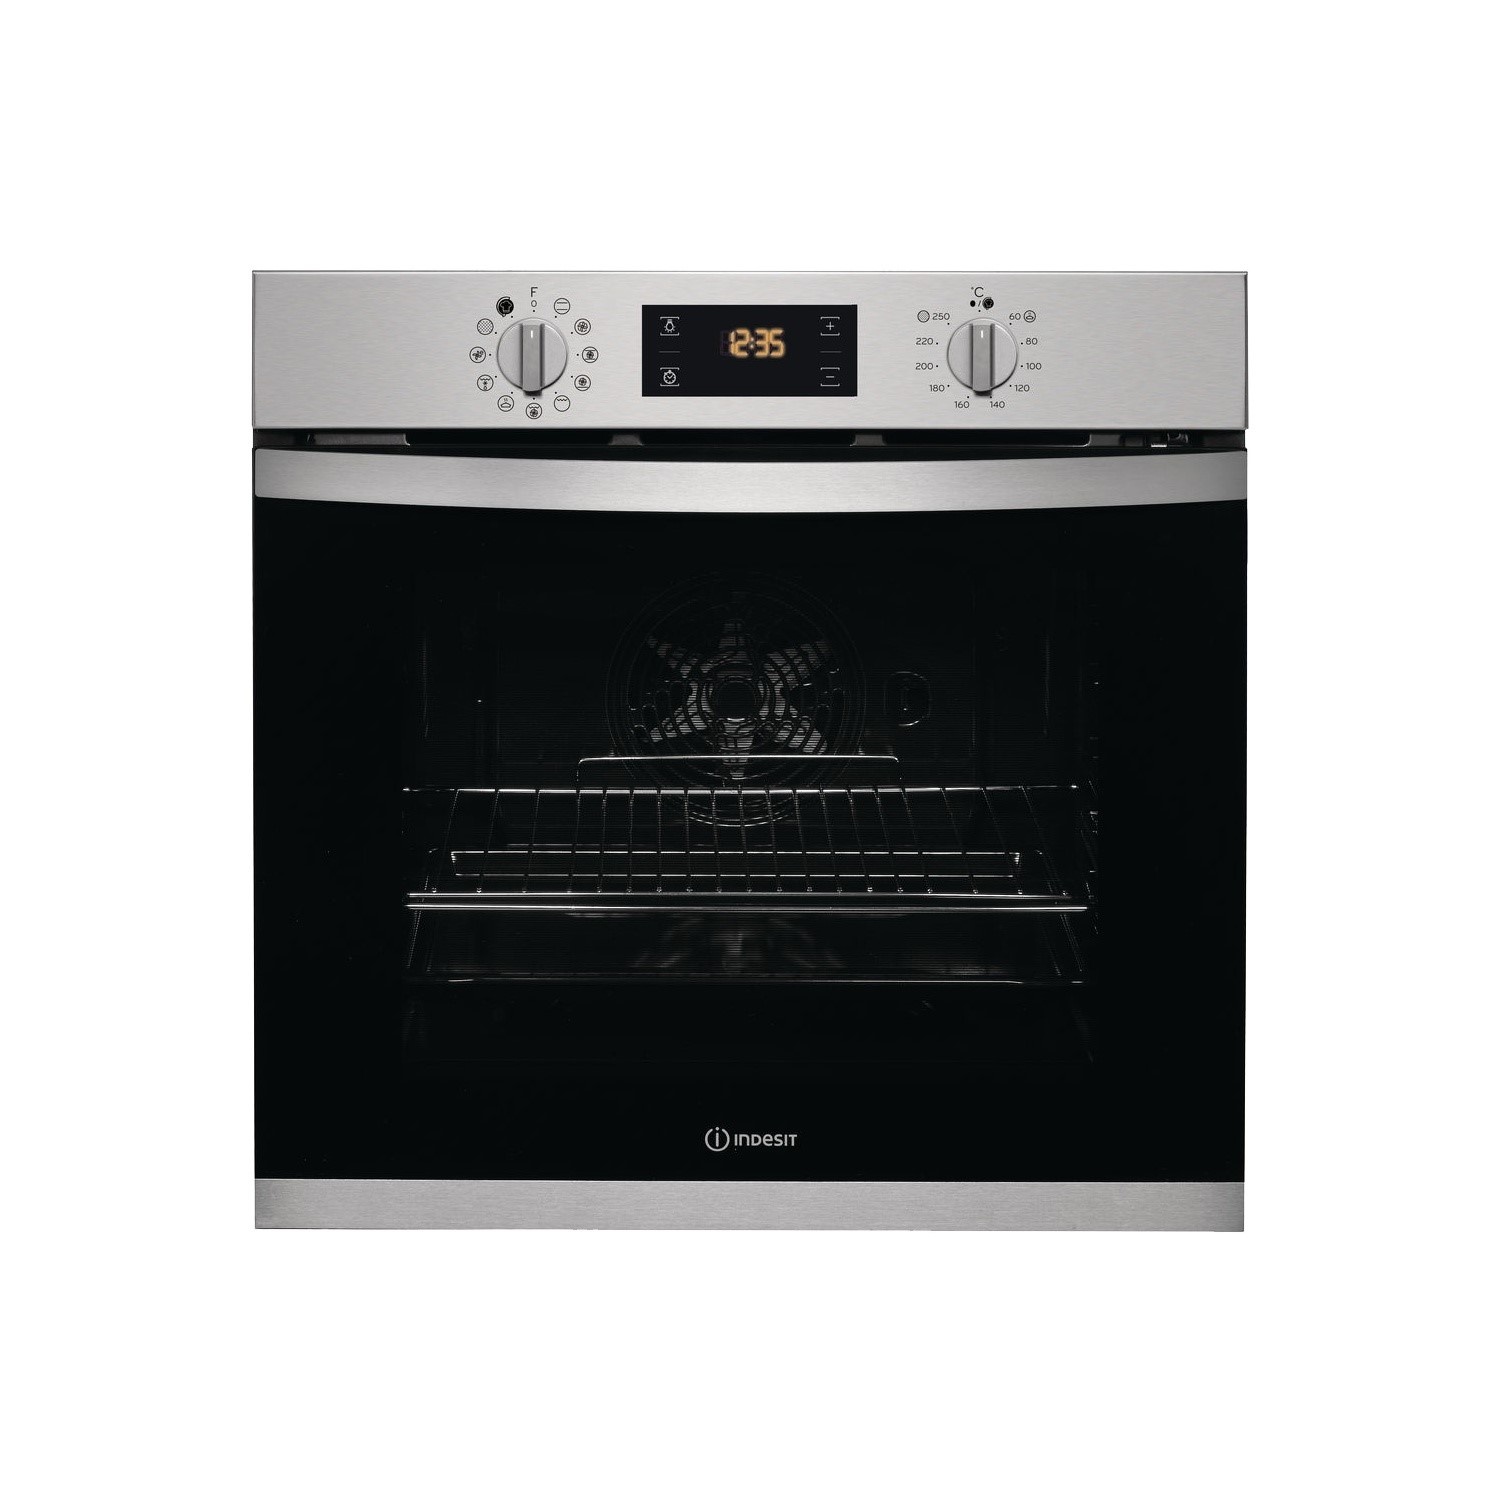 Refurbished Indesit IFW3841PIX 60cm Single Built In Electric Oven